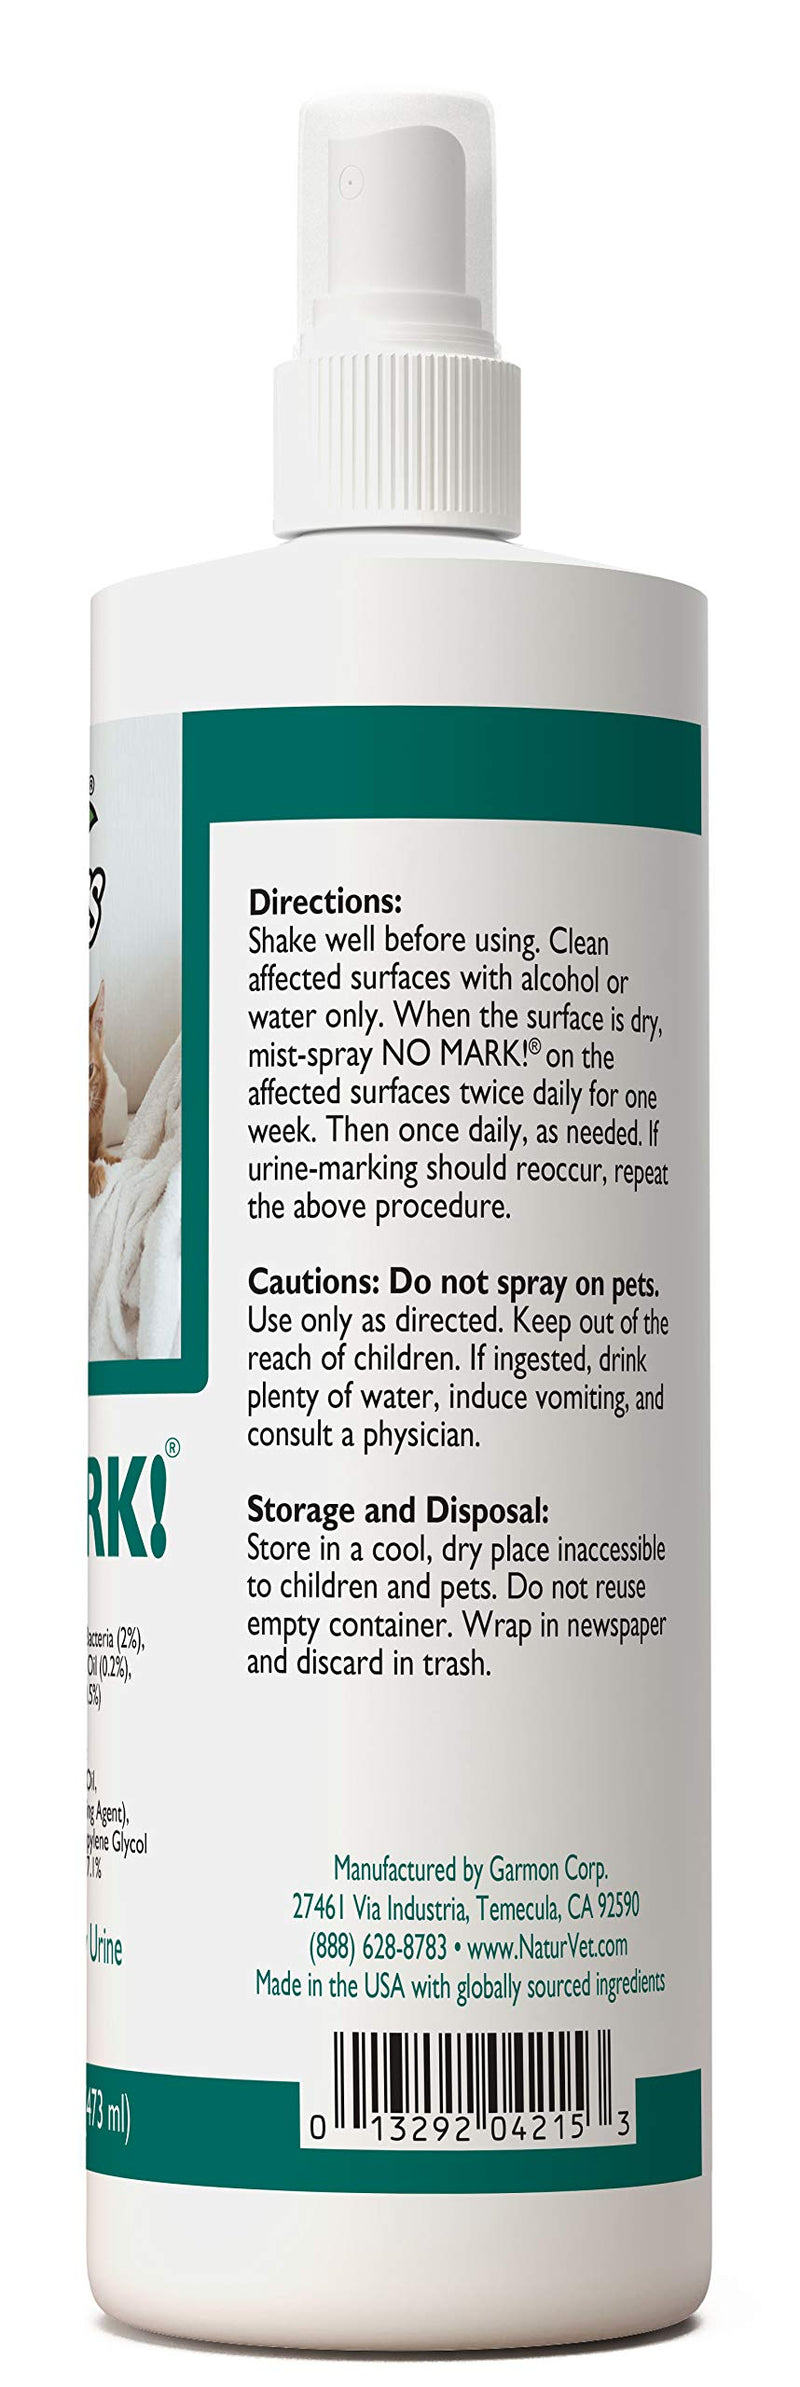 [Australia] - NaturVet – Pet Organics No Mark Spray For Cats – 16 oz – Deters Cats From Urine Marking & Eliminates Impulse to Remark – Safe for Use On Indoor Surfaces 